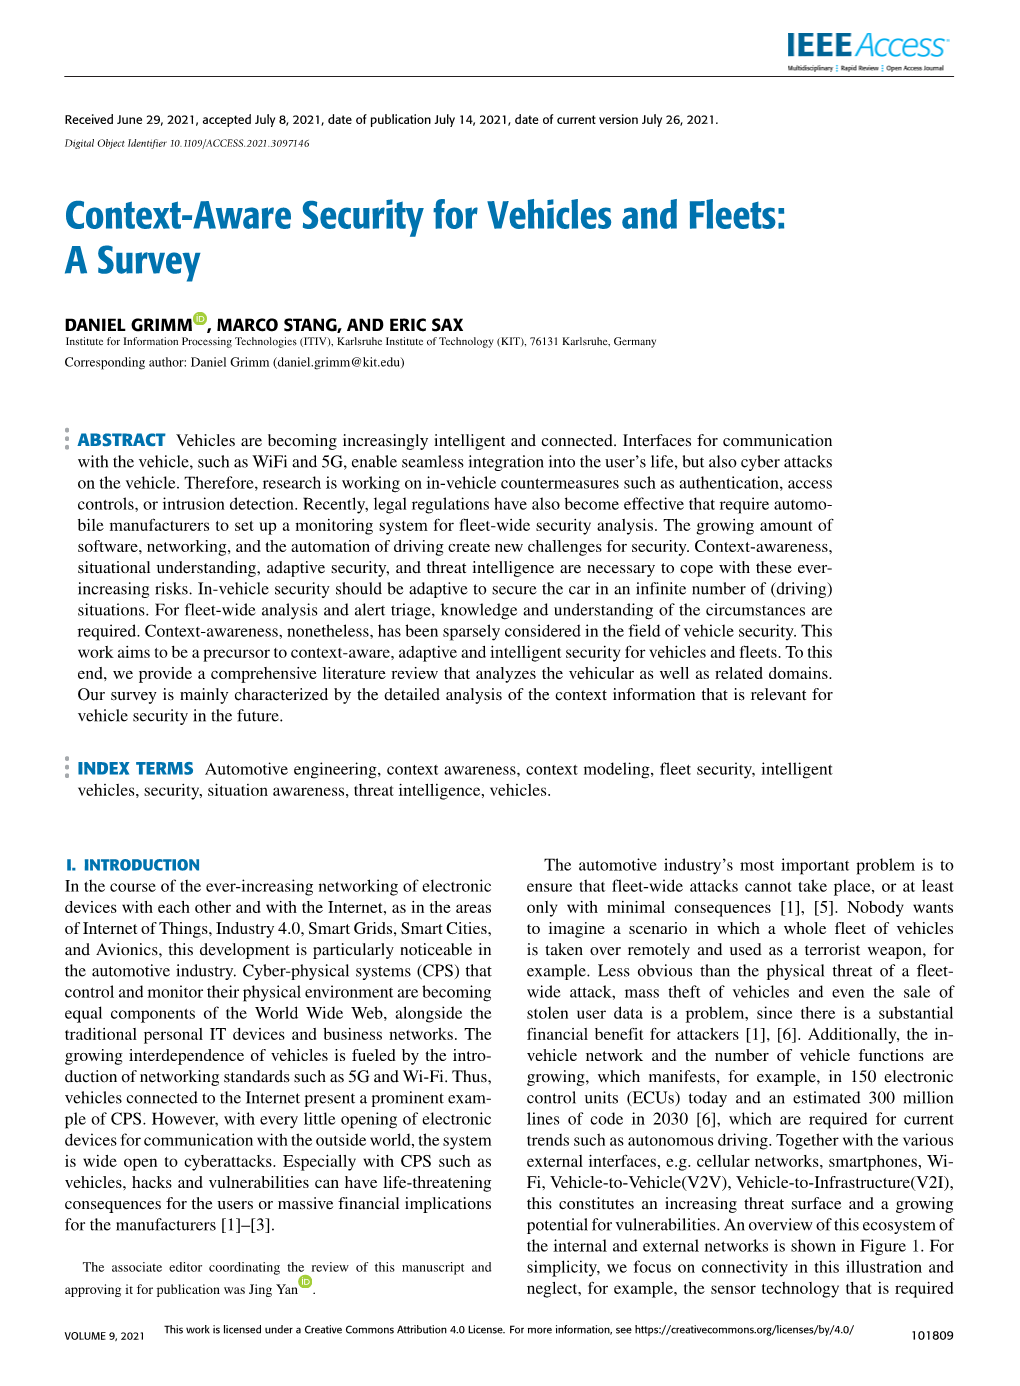 Context-Aware Security for Vehicles and Fleets: a Survey